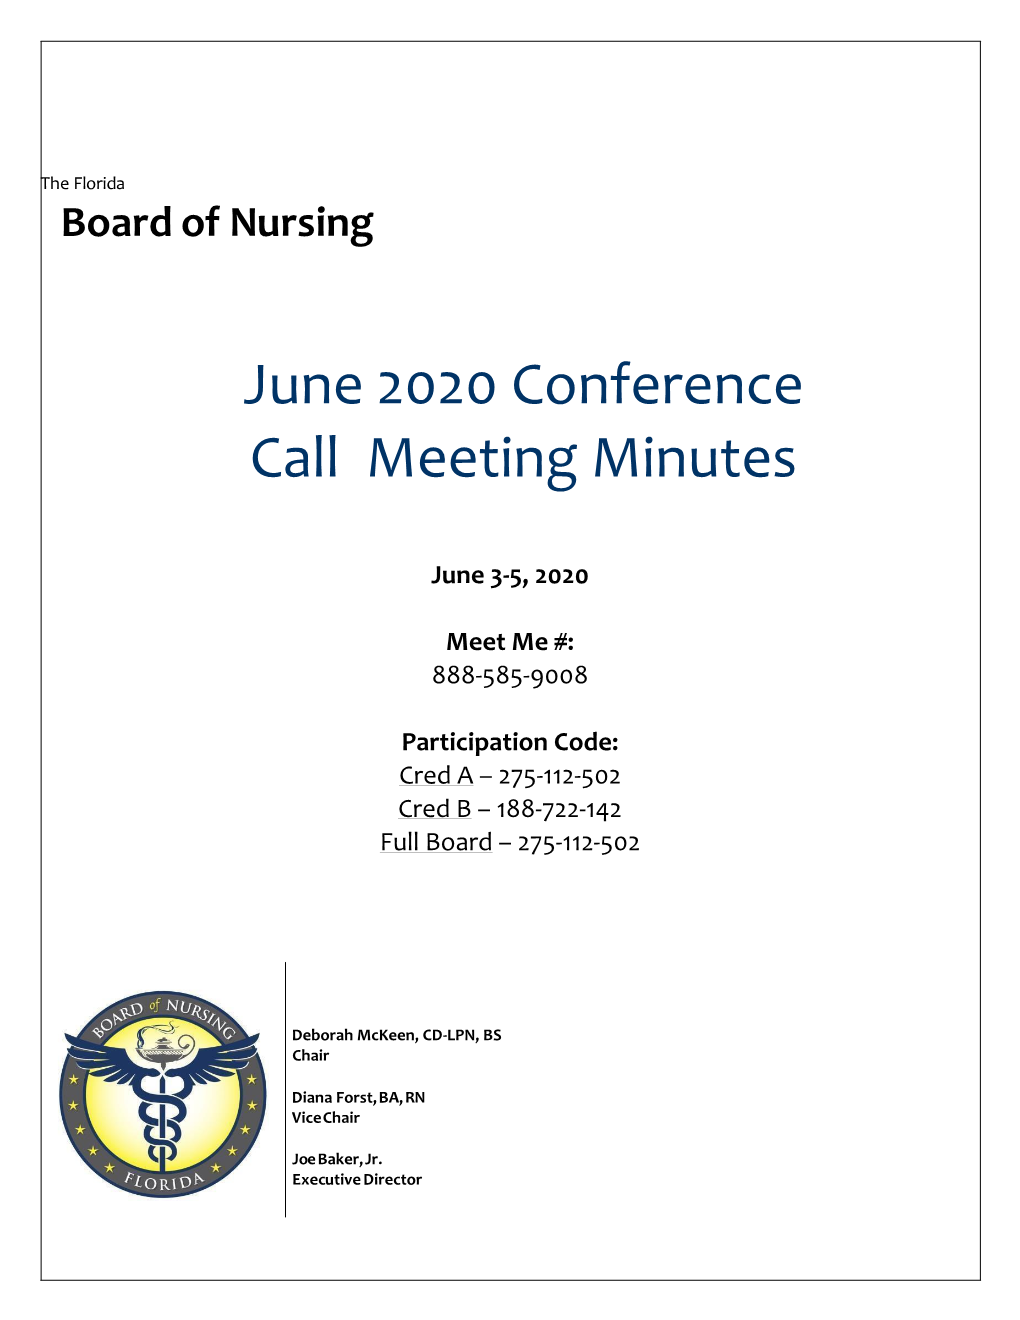 June 2020 Conference Call Meeting Minutes